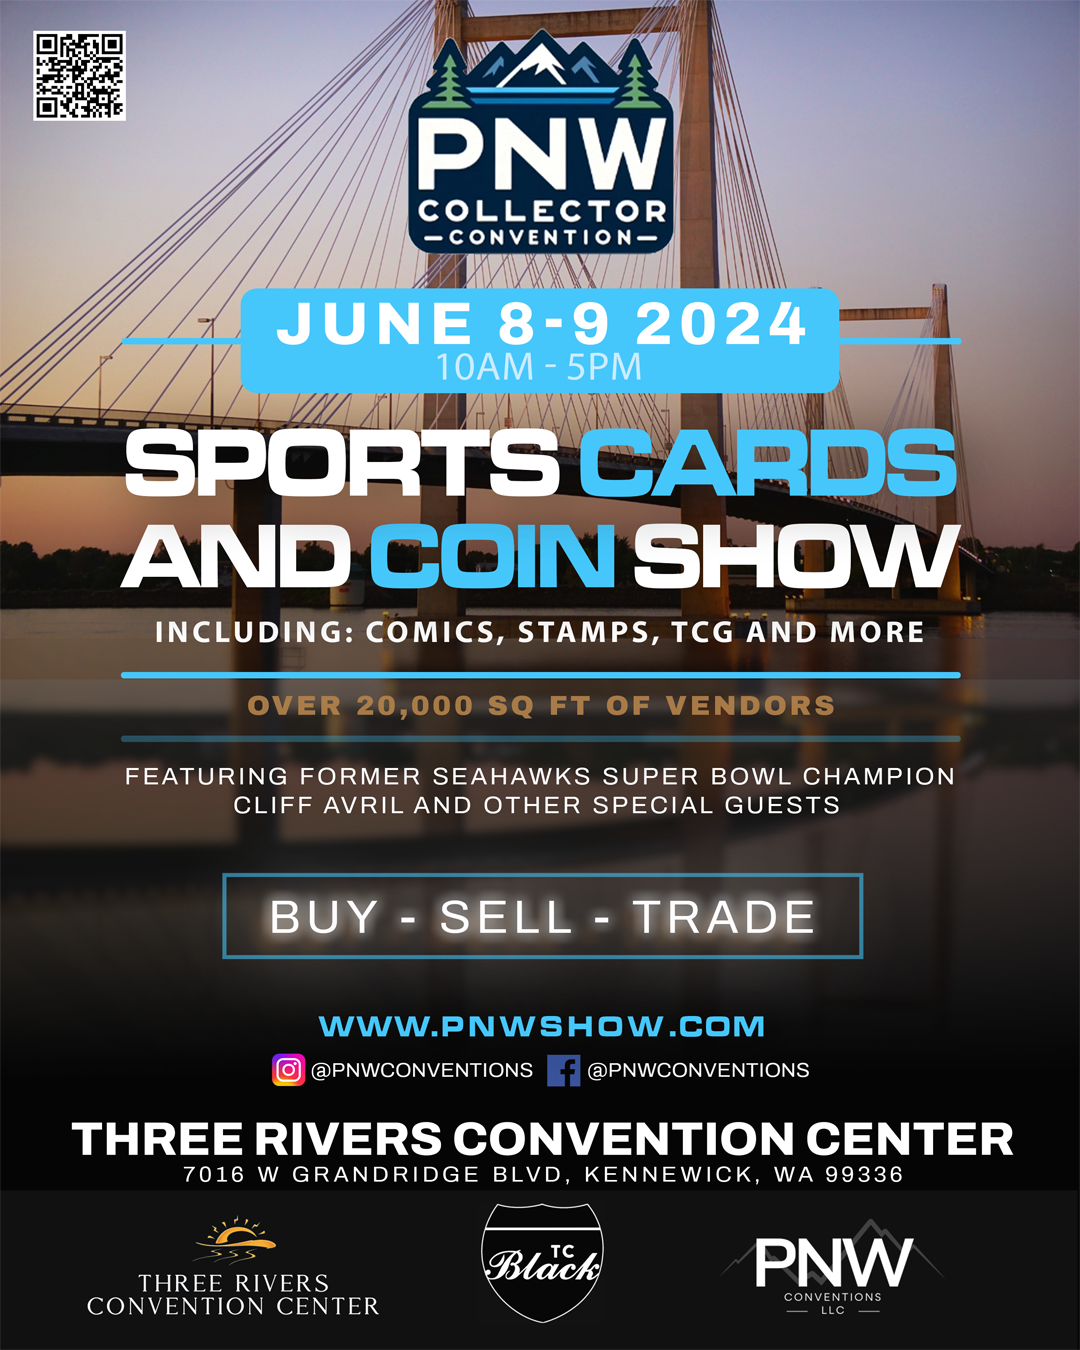 PNW Collector Convention